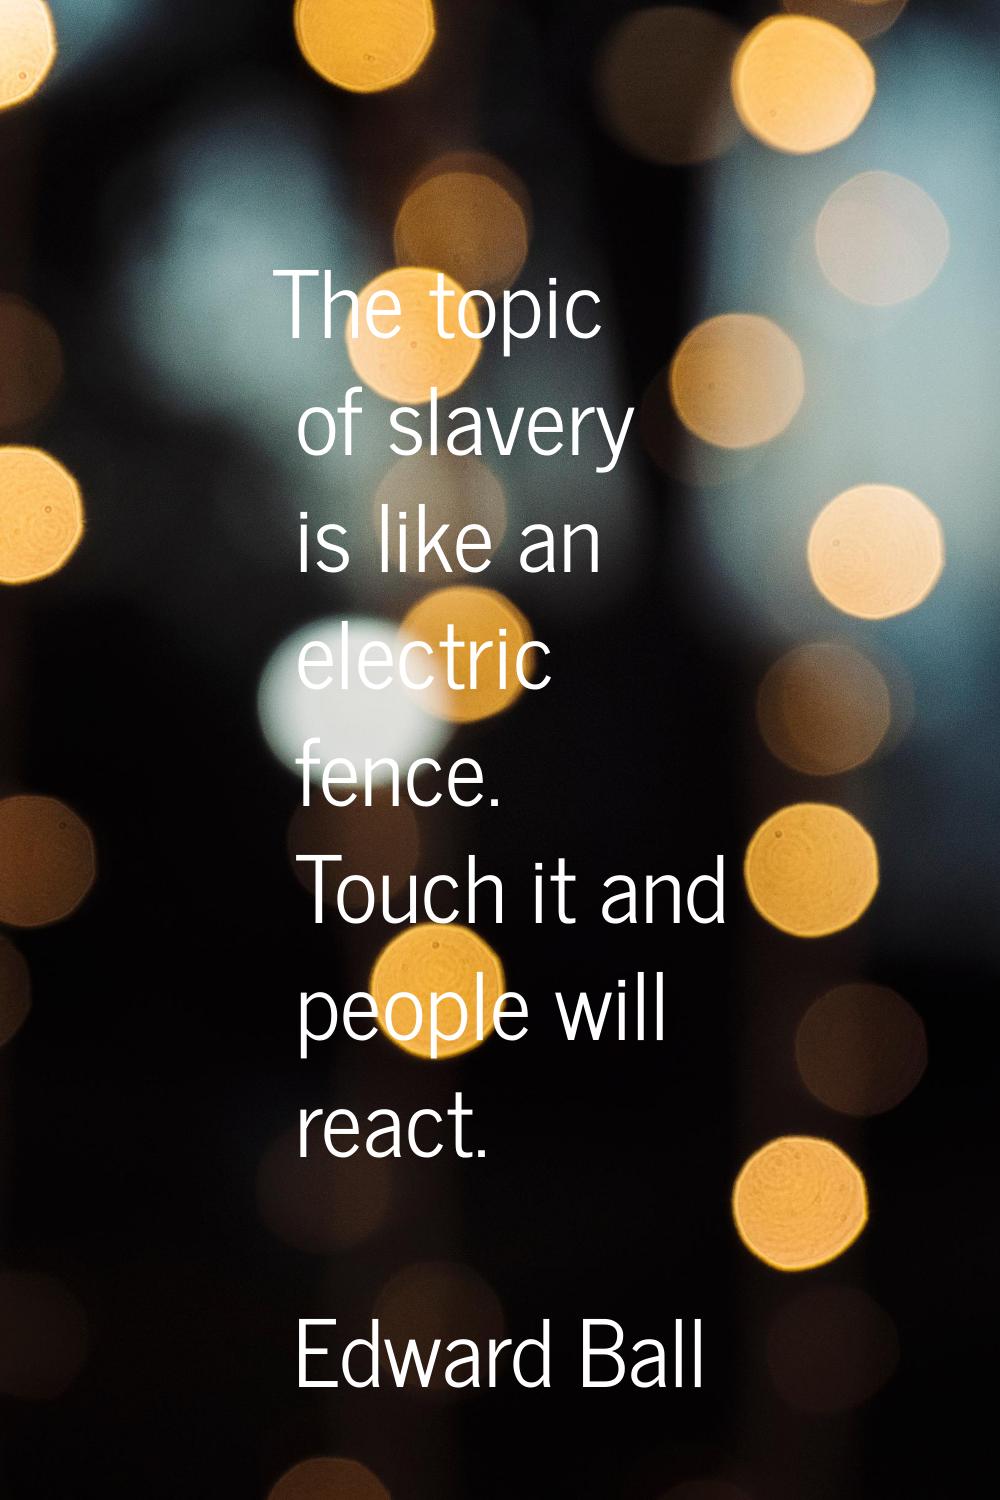 The topic of slavery is like an electric fence. Touch it and people will react.